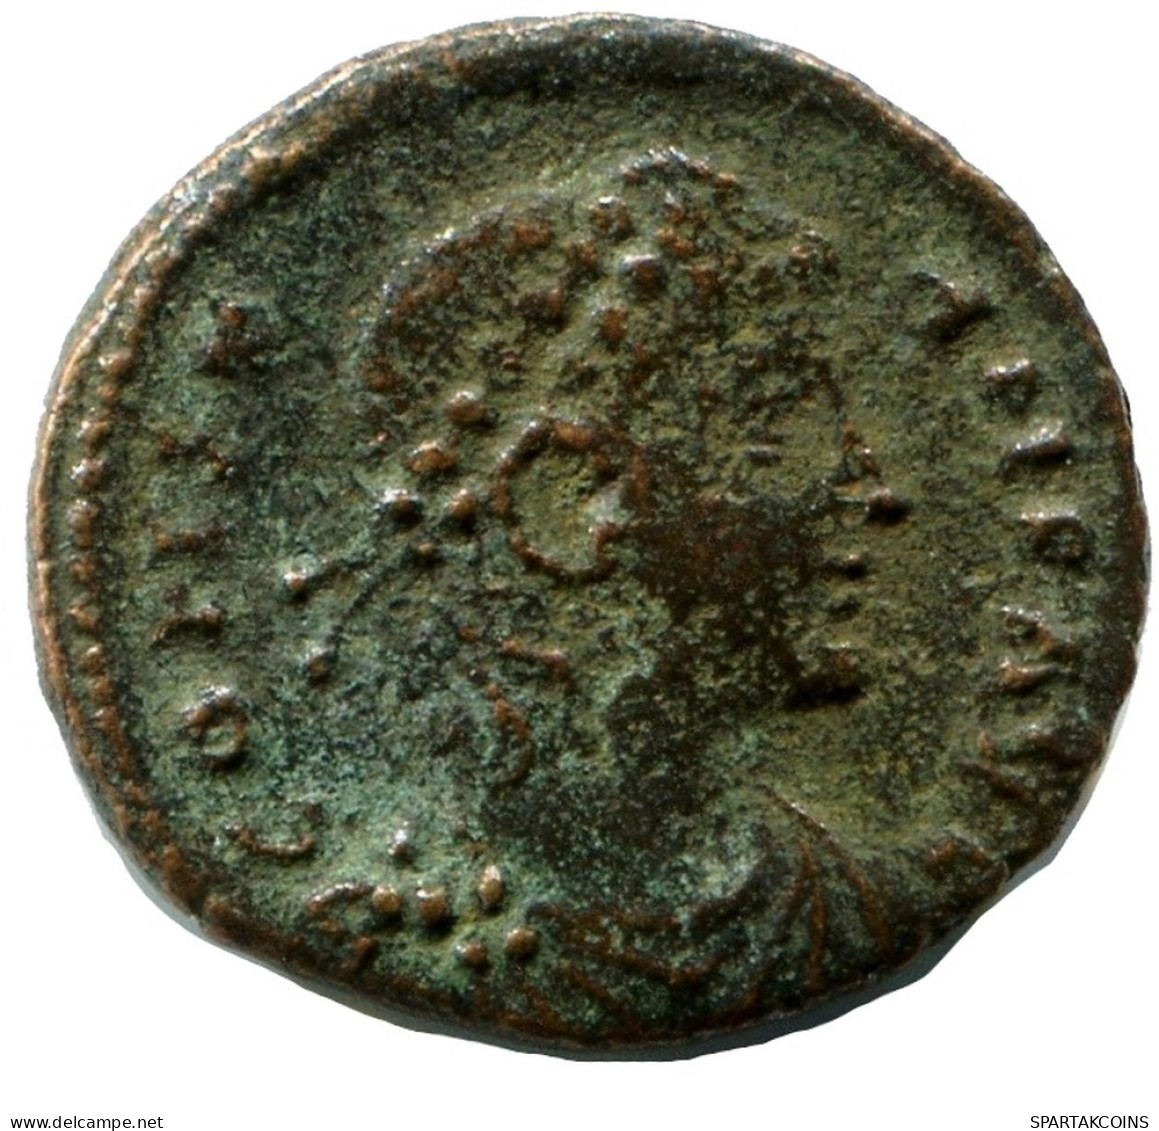 CONSTANS MINTED IN ALEKSANDRIA FROM THE ROYAL ONTARIO MUSEUM #ANC11448.14.E.A - L'Empire Chrétien (307 à 363)